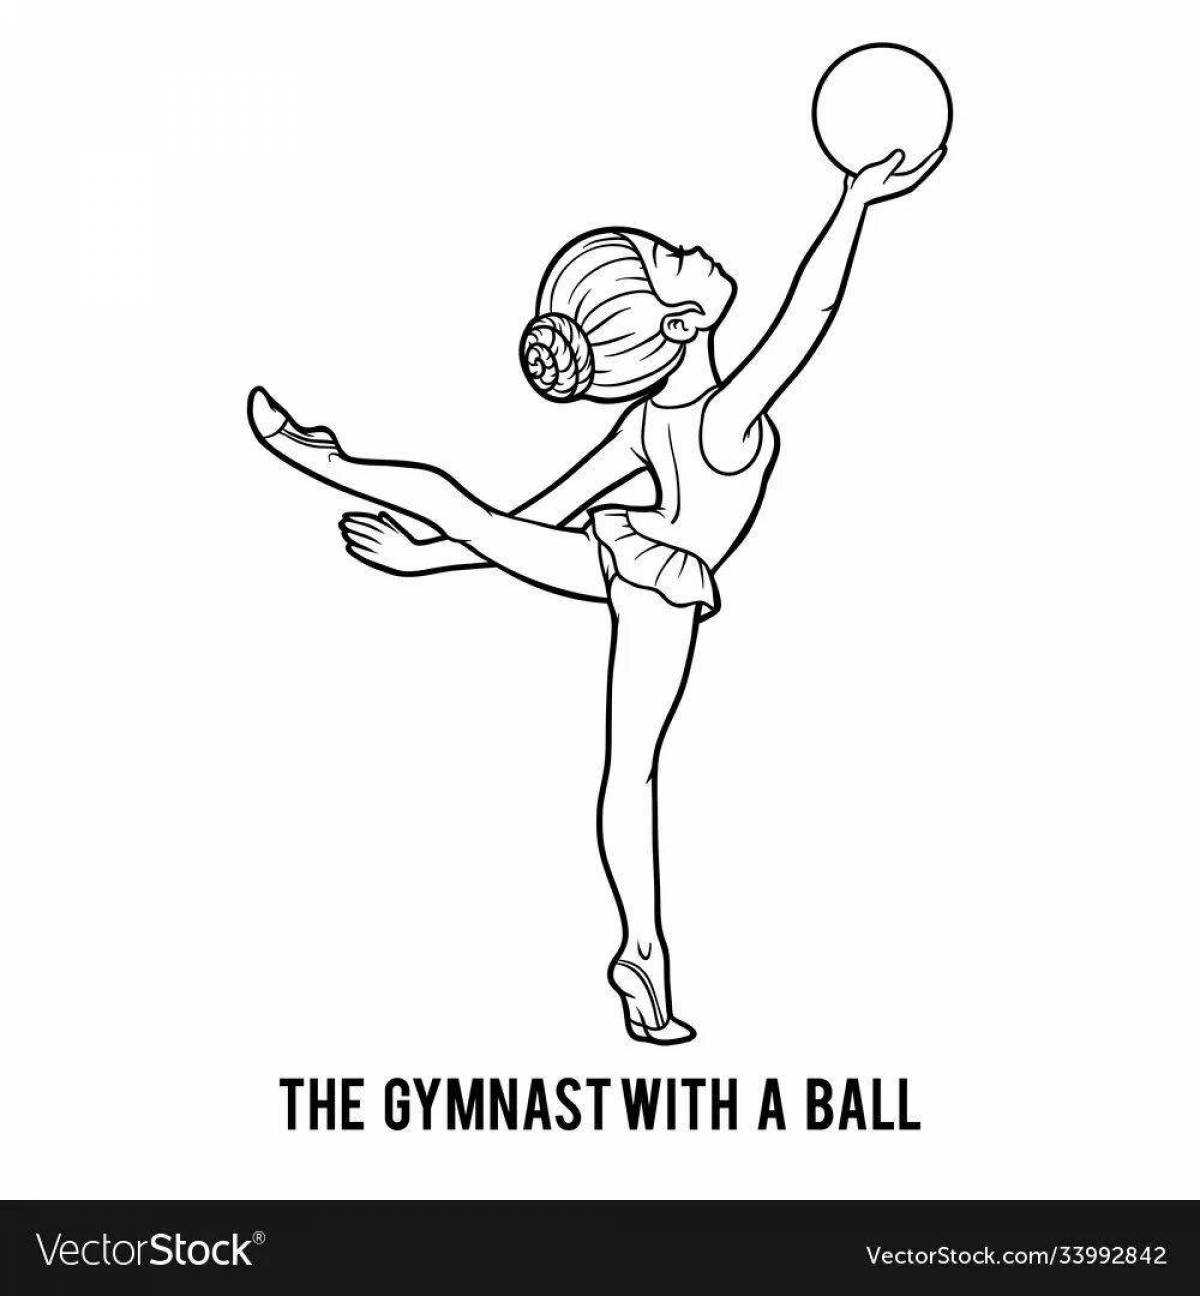 Great gymnast coloring book for kids